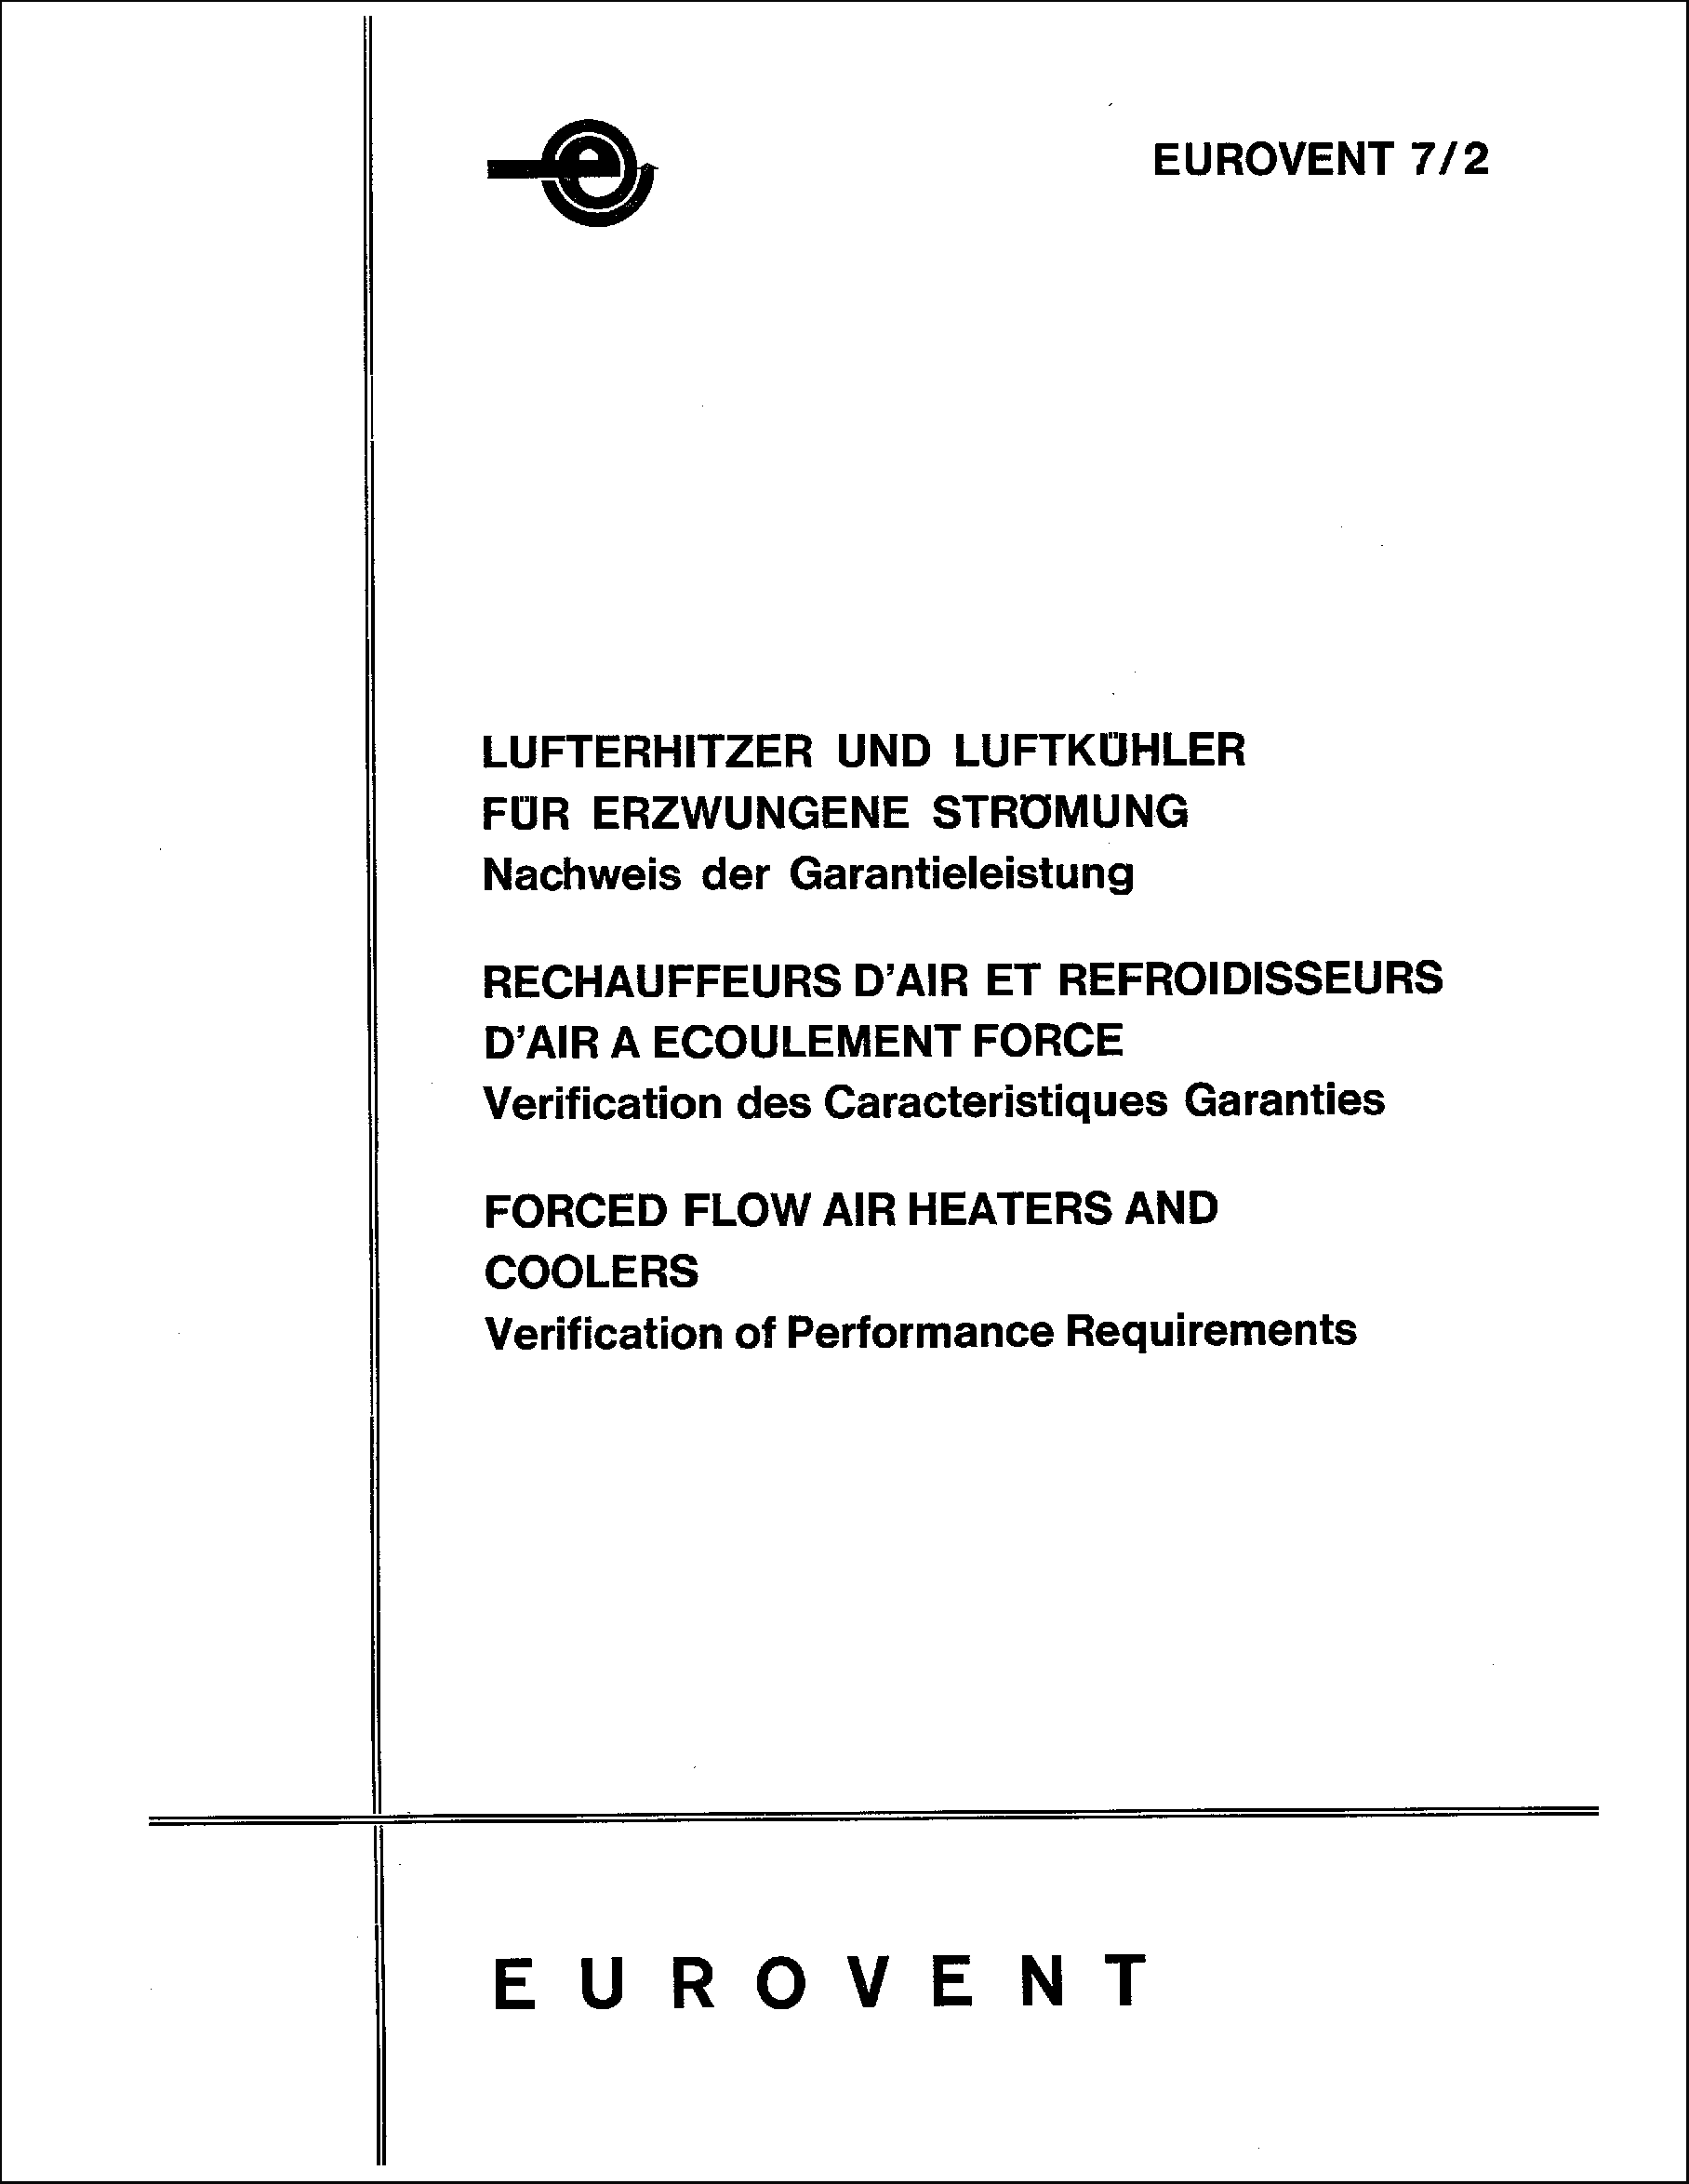 1984 - Forced flow air heaters and coolers: Verification of performance requirements